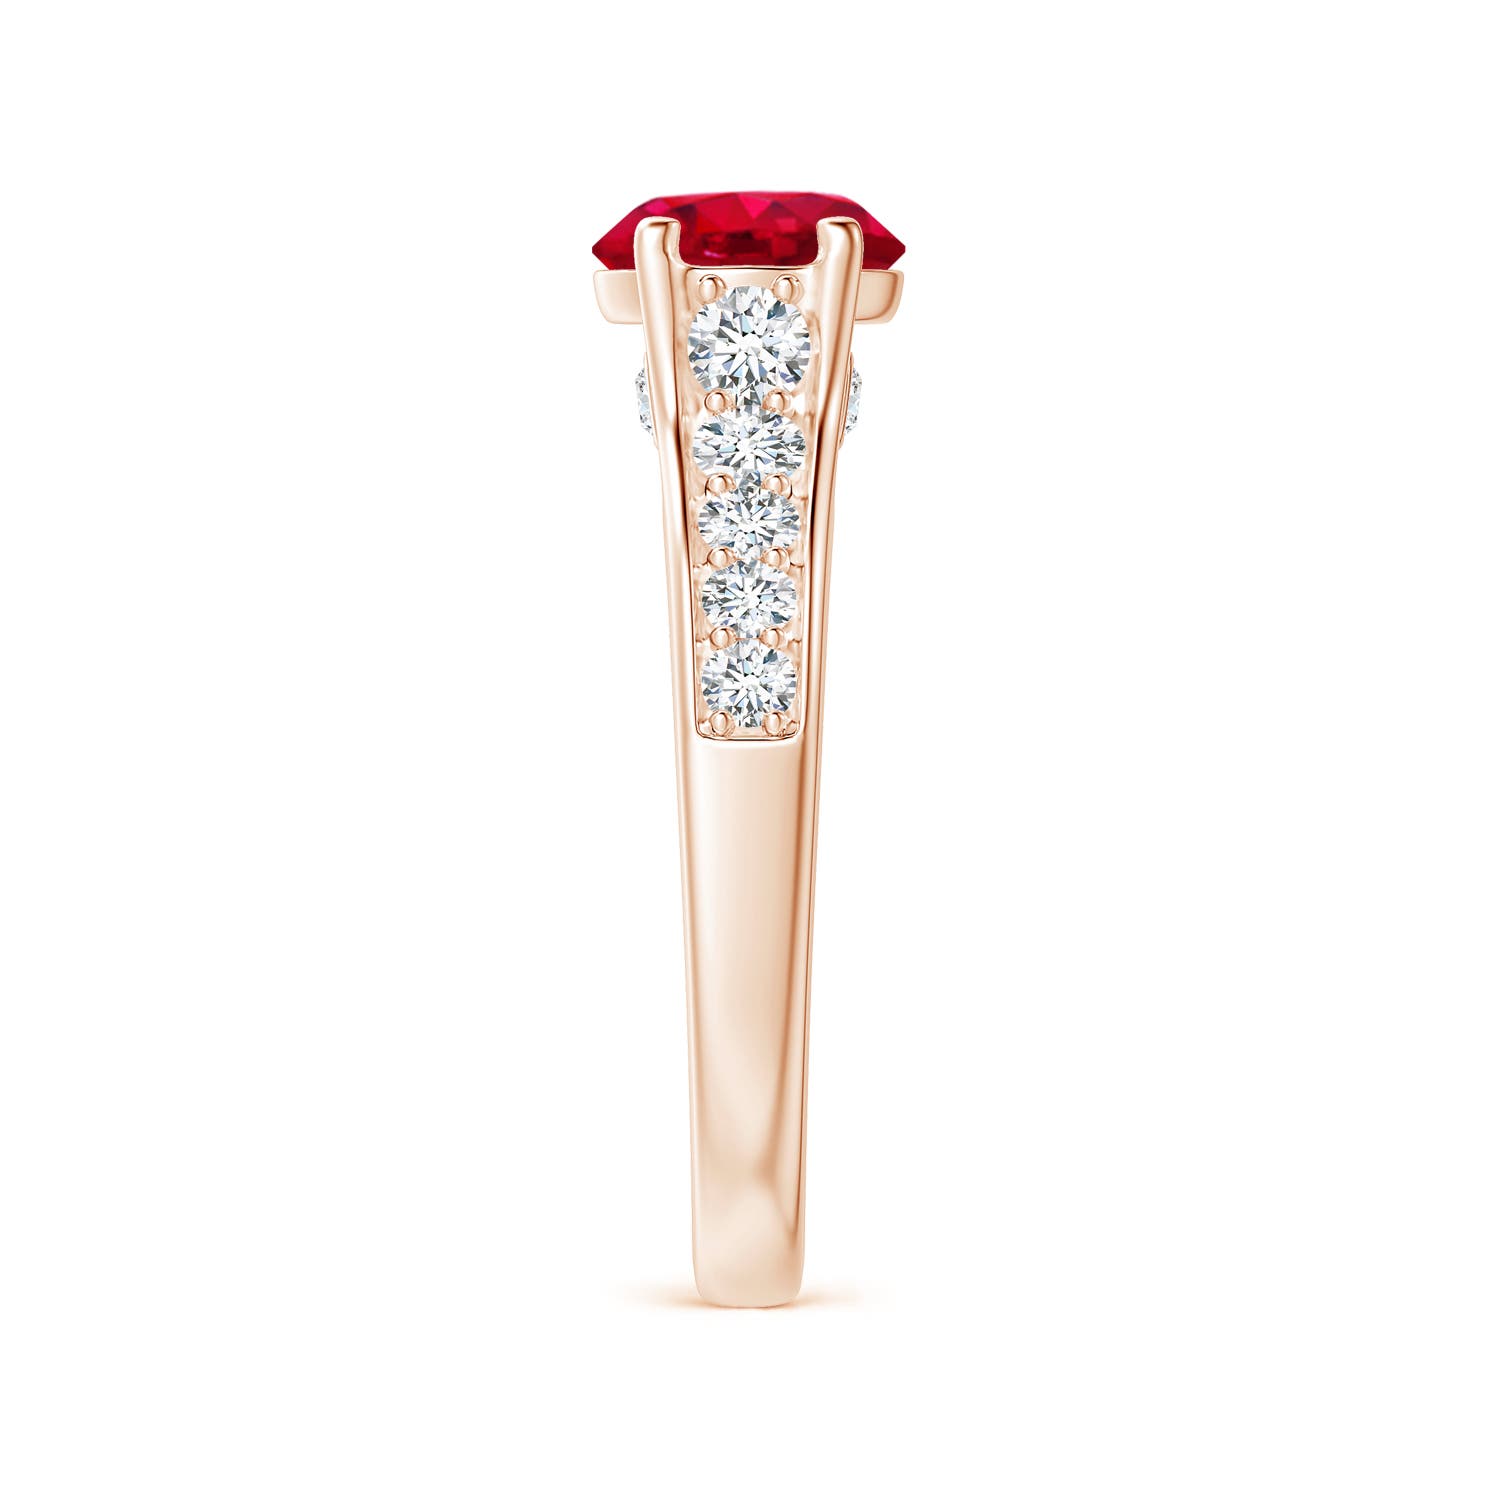 AAA - Ruby / 1.94 CT / 14 KT Rose Gold